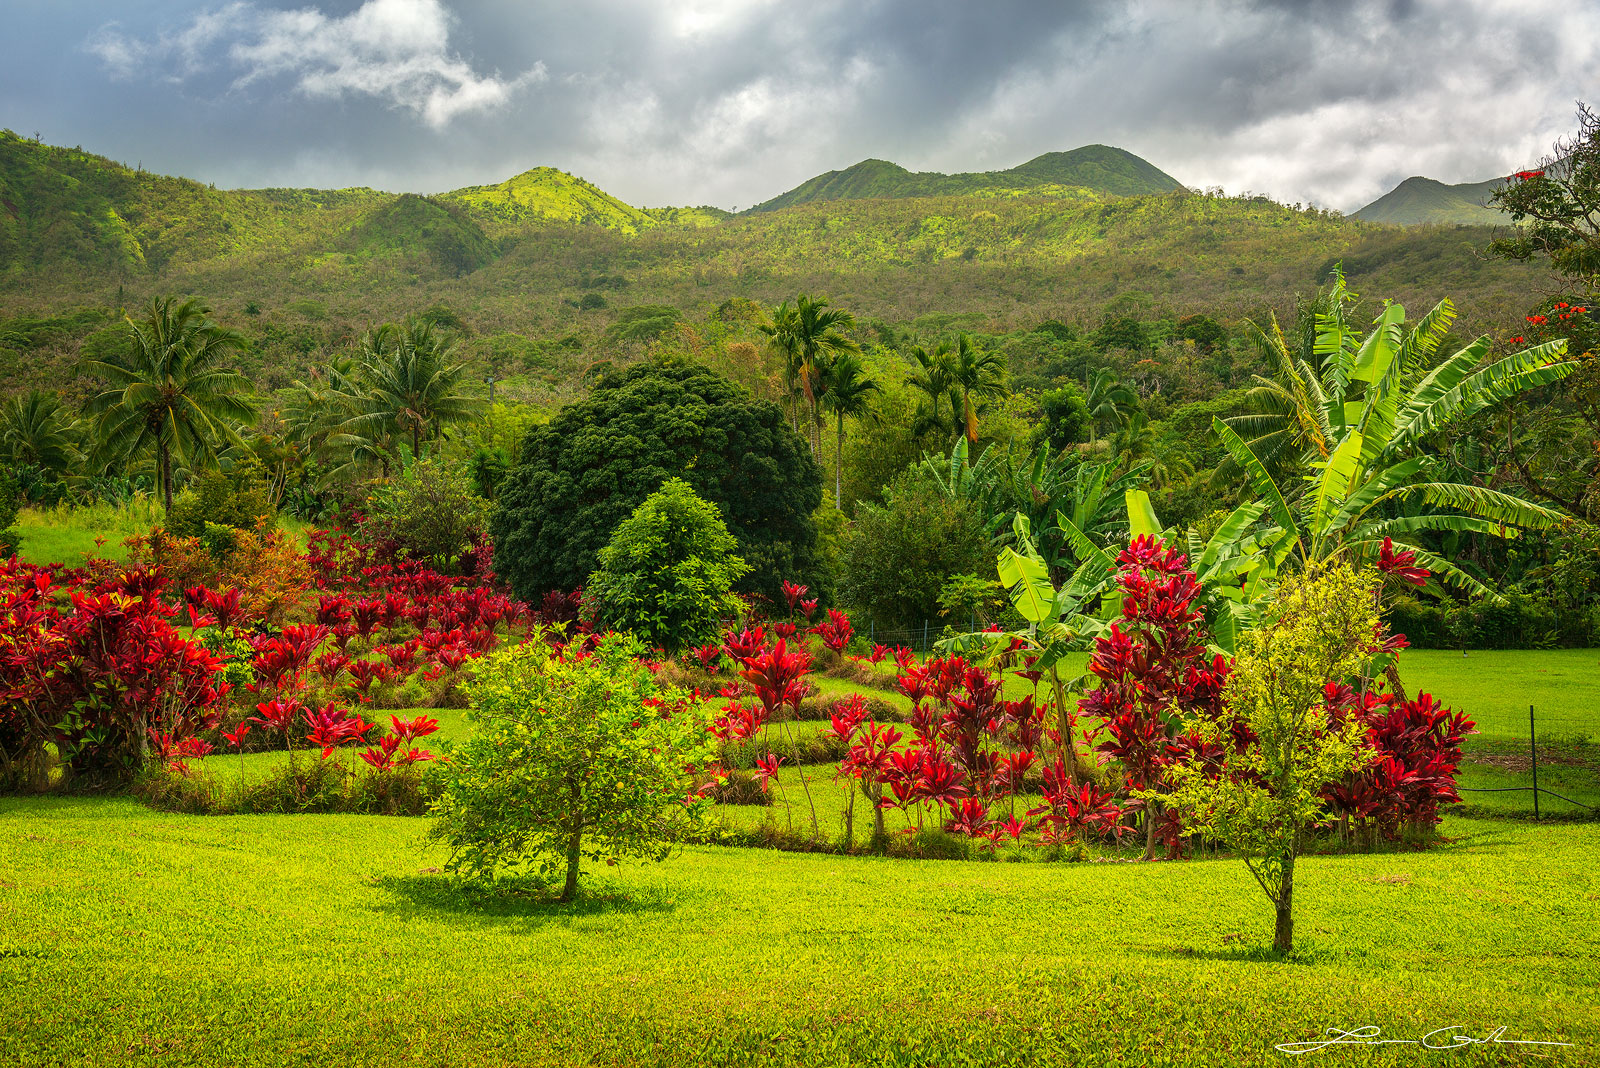 Panorama of a lush Hawaiian garden featuring blooming red shrubs, green trees, and palm trees, with mountains in the distant background in Maui - Gintchin Fine Art